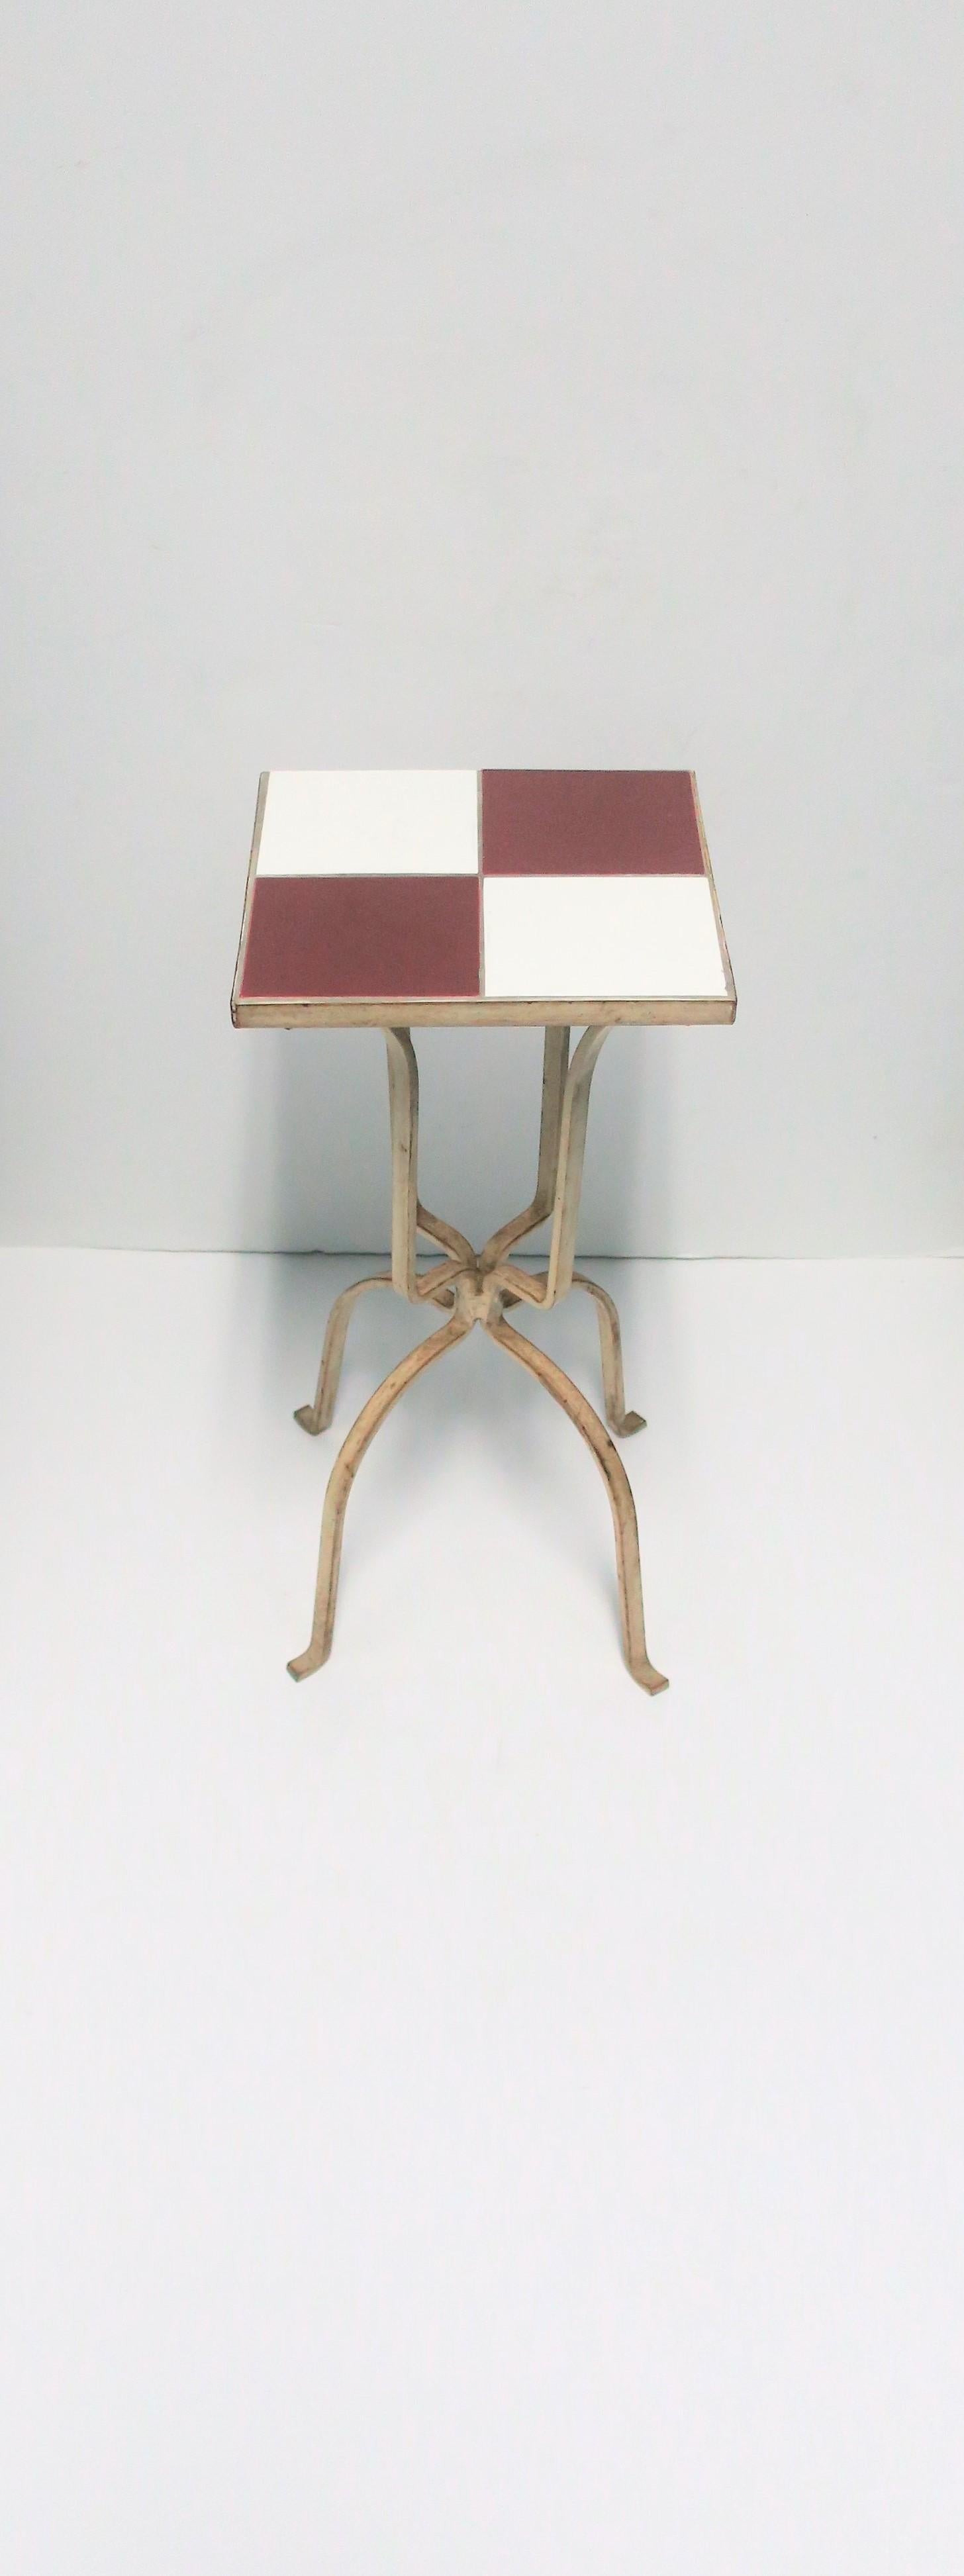 A small Mid-Century Modern square red and white ceramic mosaic tile top side or drinks table, circa mid-20th century. Table has a white metal frame with red/burgundy/'ox blood' and white/off-white ceramic tile top. Table is a convenient size